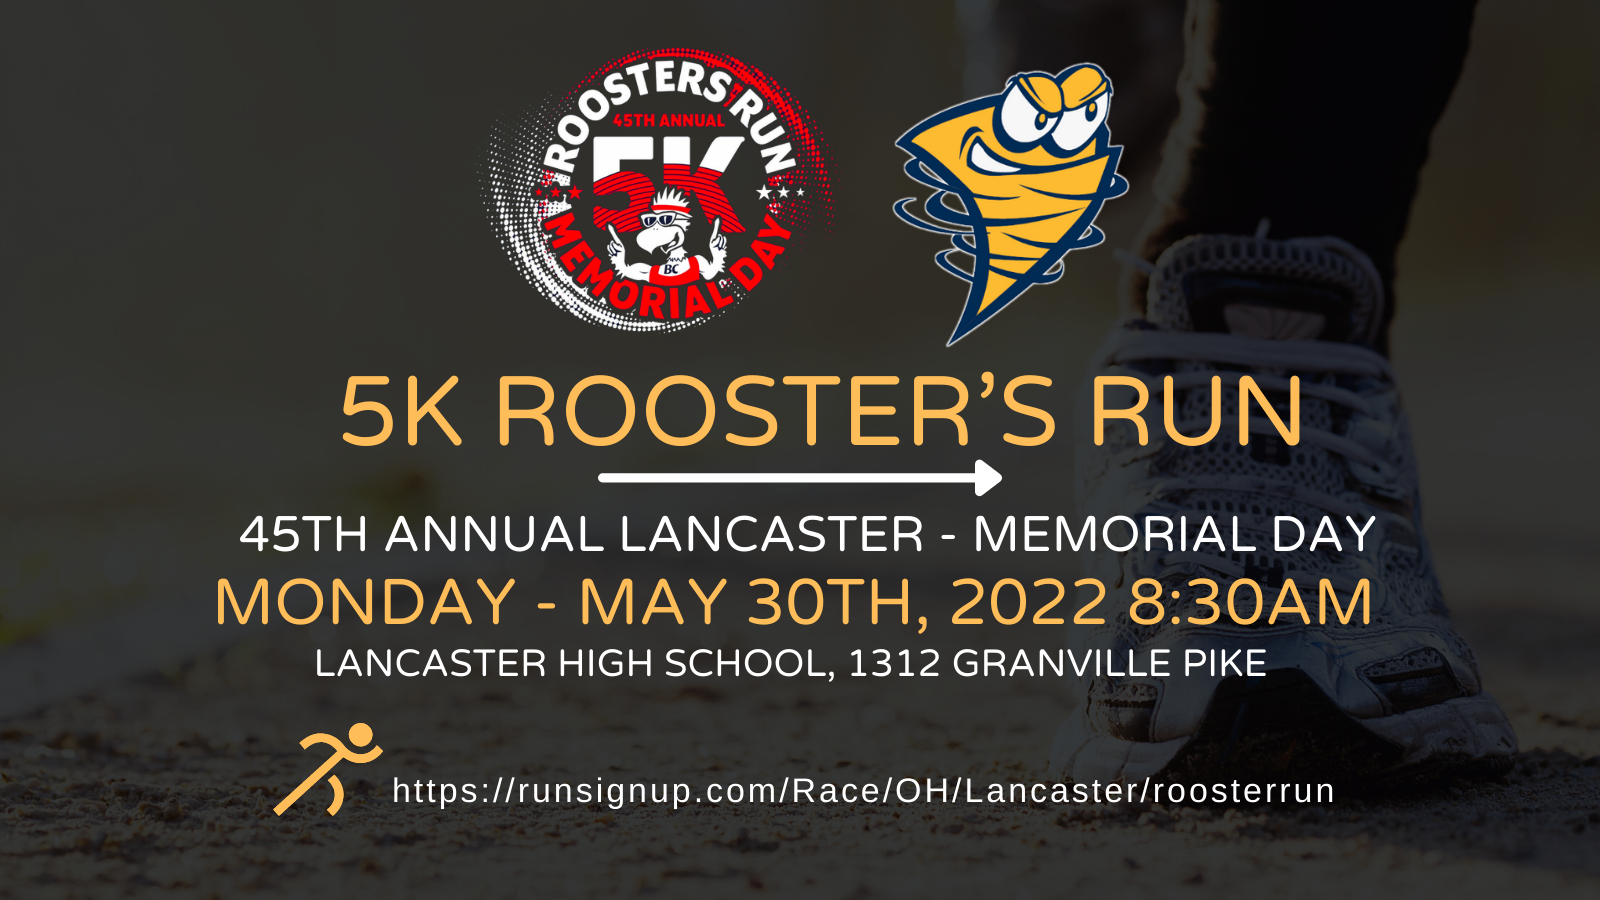 5K Rooster’s Run ad